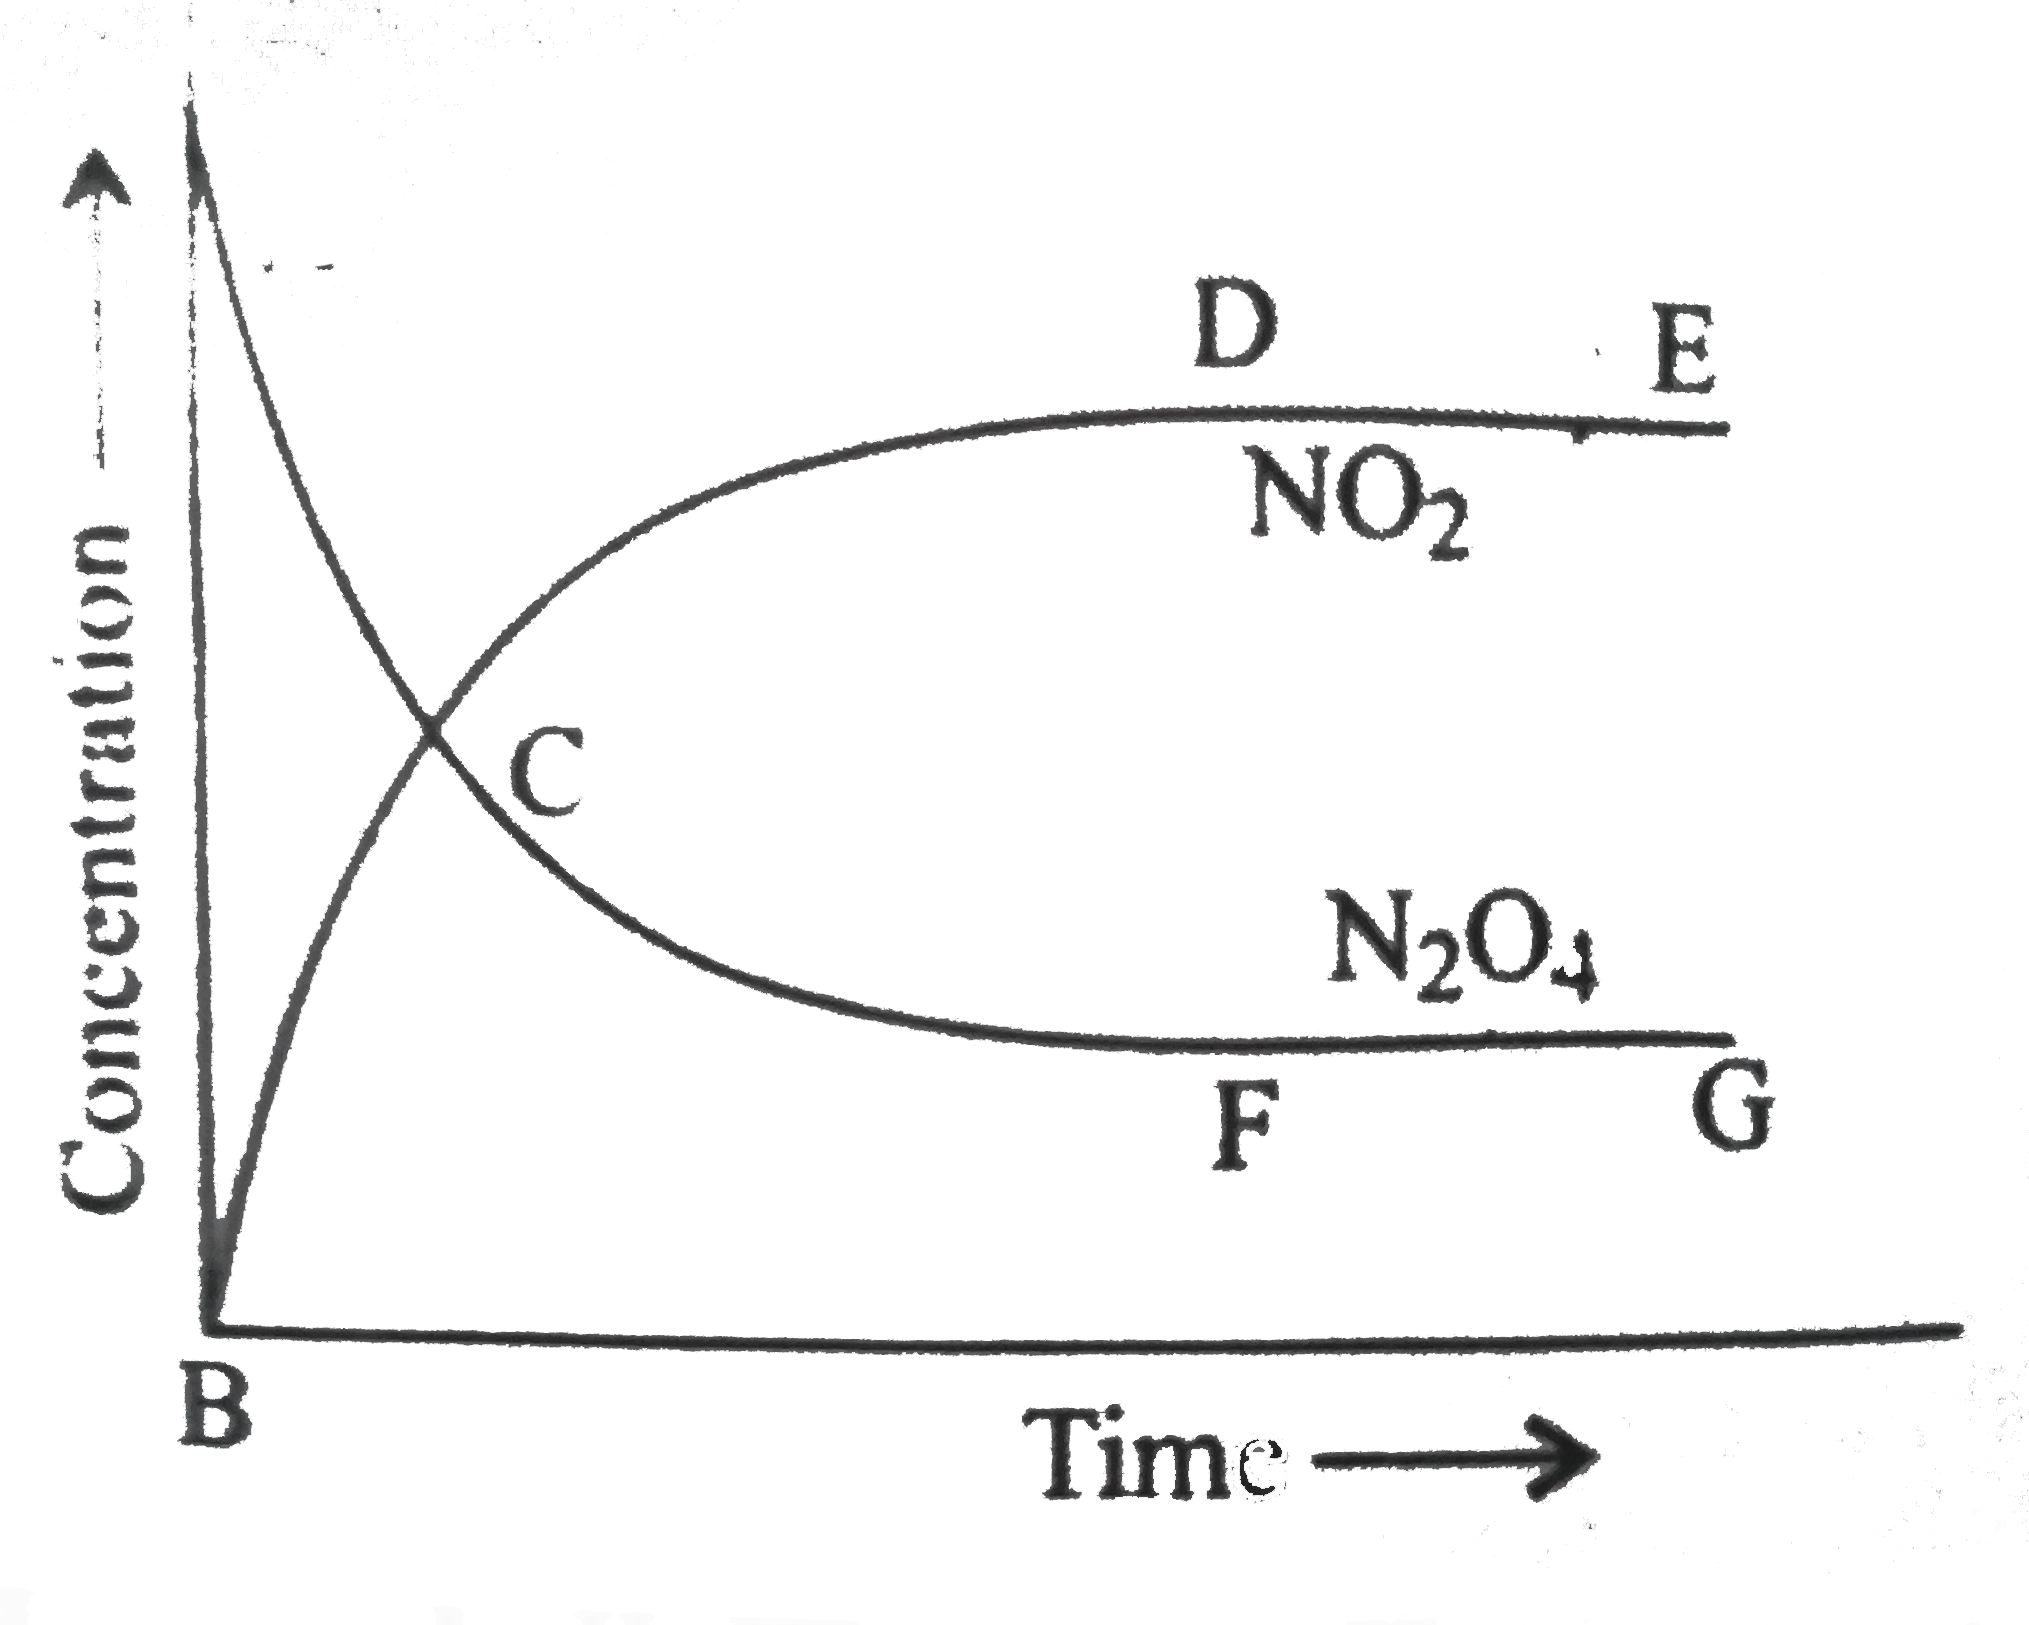 N(2)O(4) hArr 2NO(2), K(c)=4. This reversible reaction is studied graphically as shown in the figure. Select the correct statement out of I, II and III.   I : Reaction quotient has maximum value at point A   II : Reaction proceeds left to right at a point when [N(2)O(2)]=[NO(2)]=0.1 M   III : K=Q when point D or F is reached: